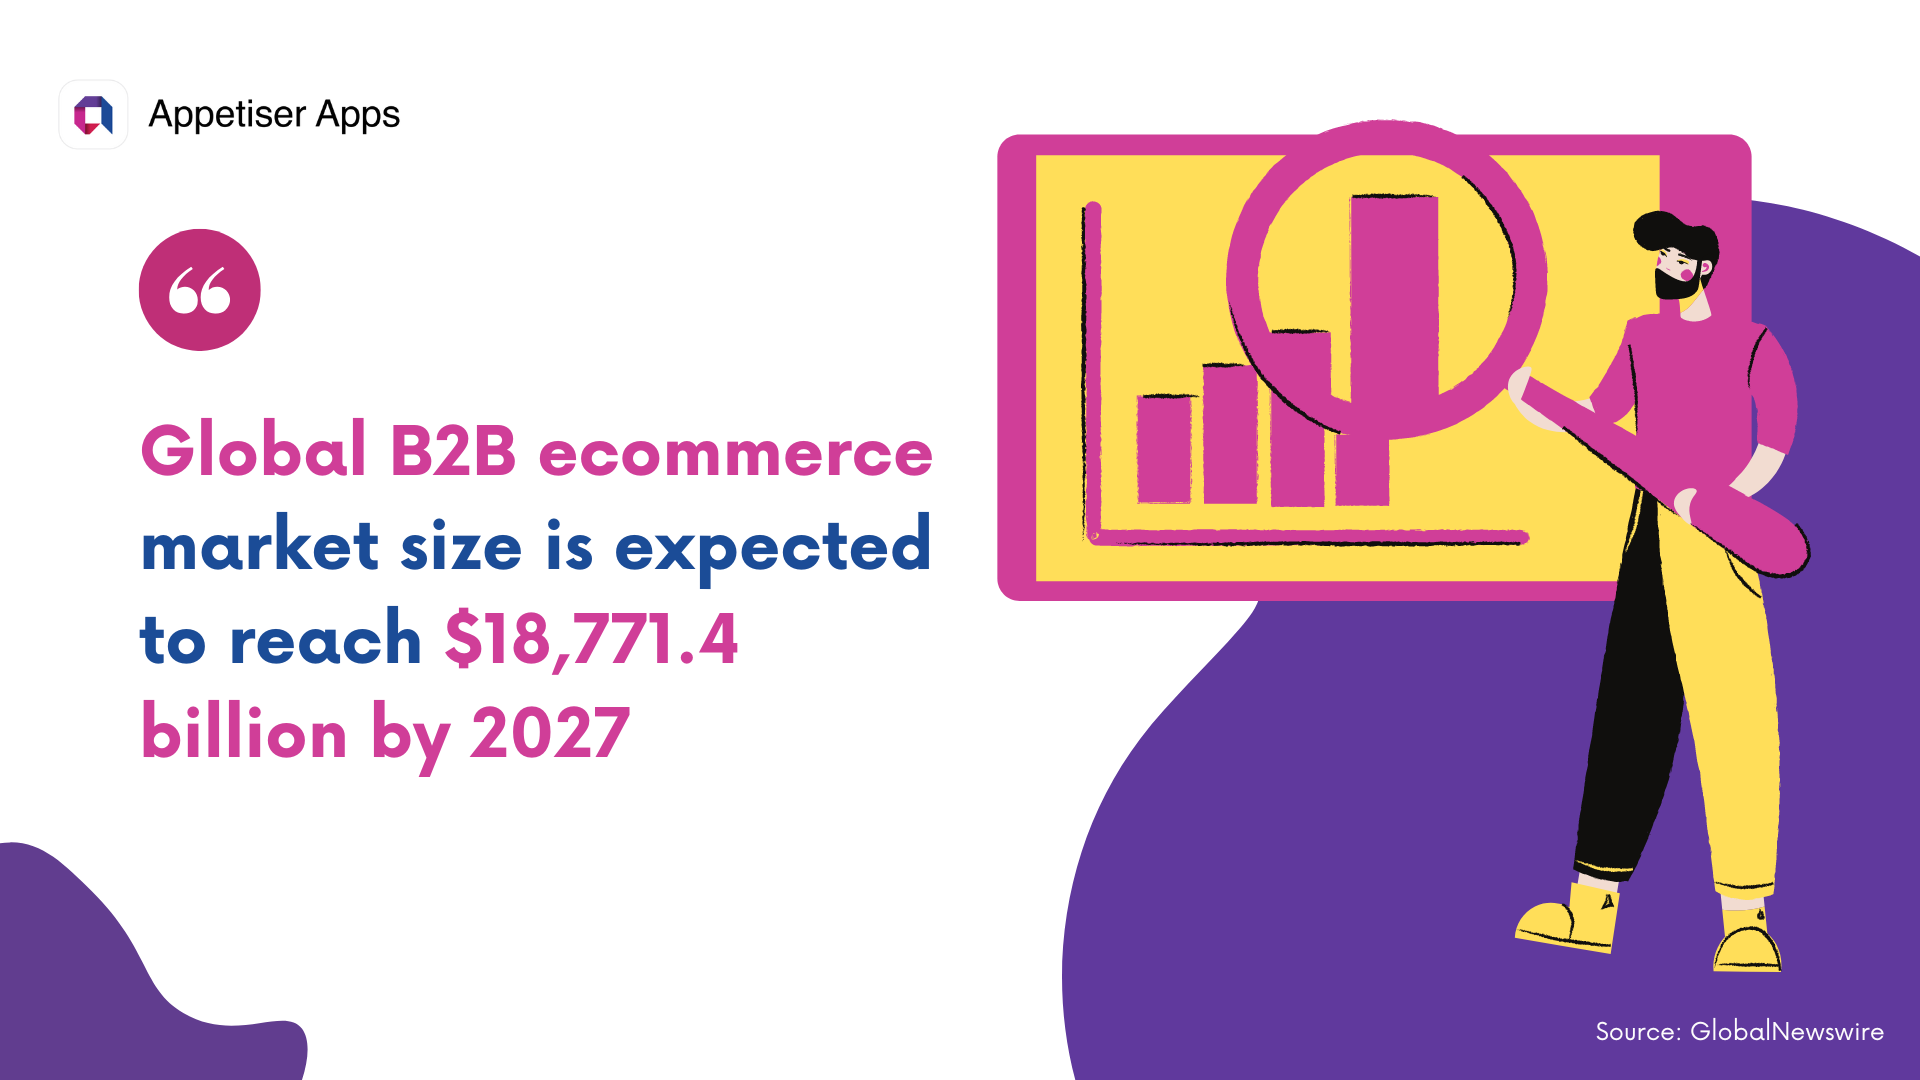 BETS: B2B ecommerce trends and statistics on market size